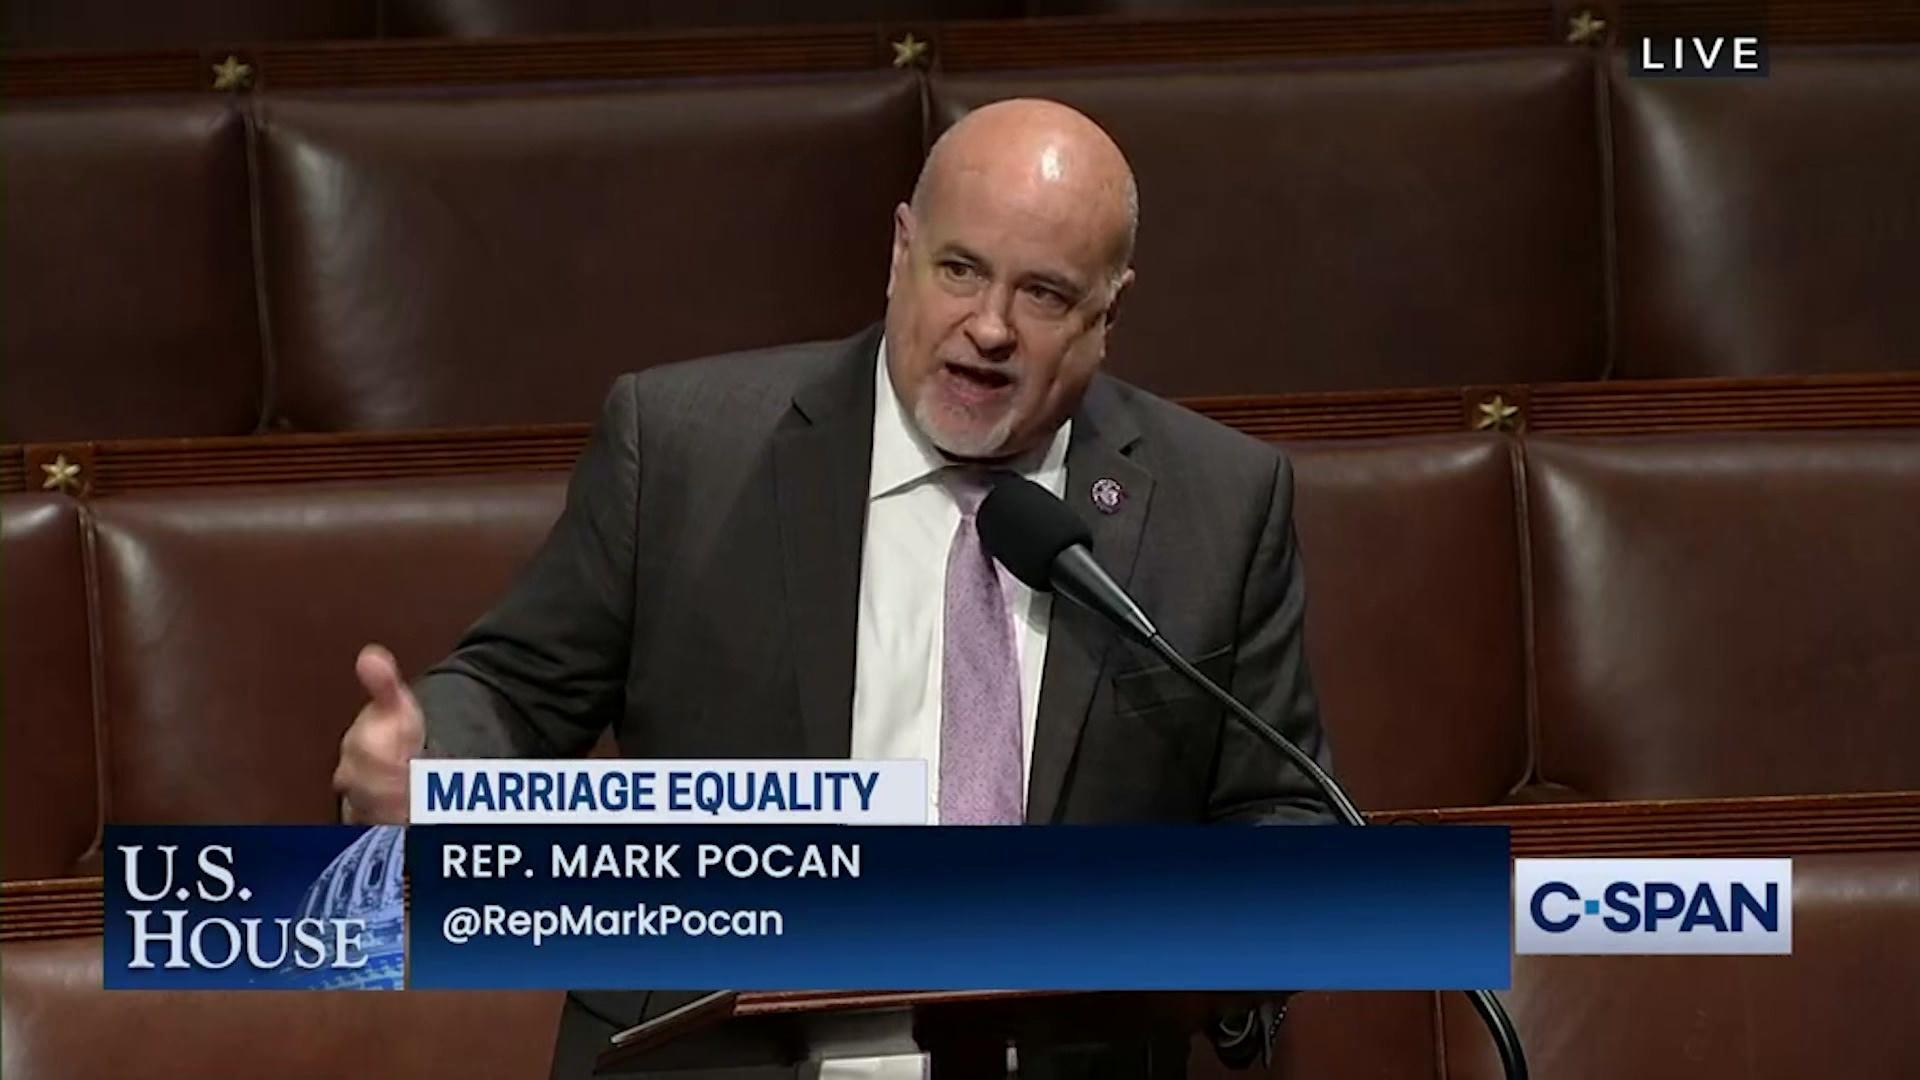 U.S. Rep. Mark Pocan on the Respect for Marriage Act